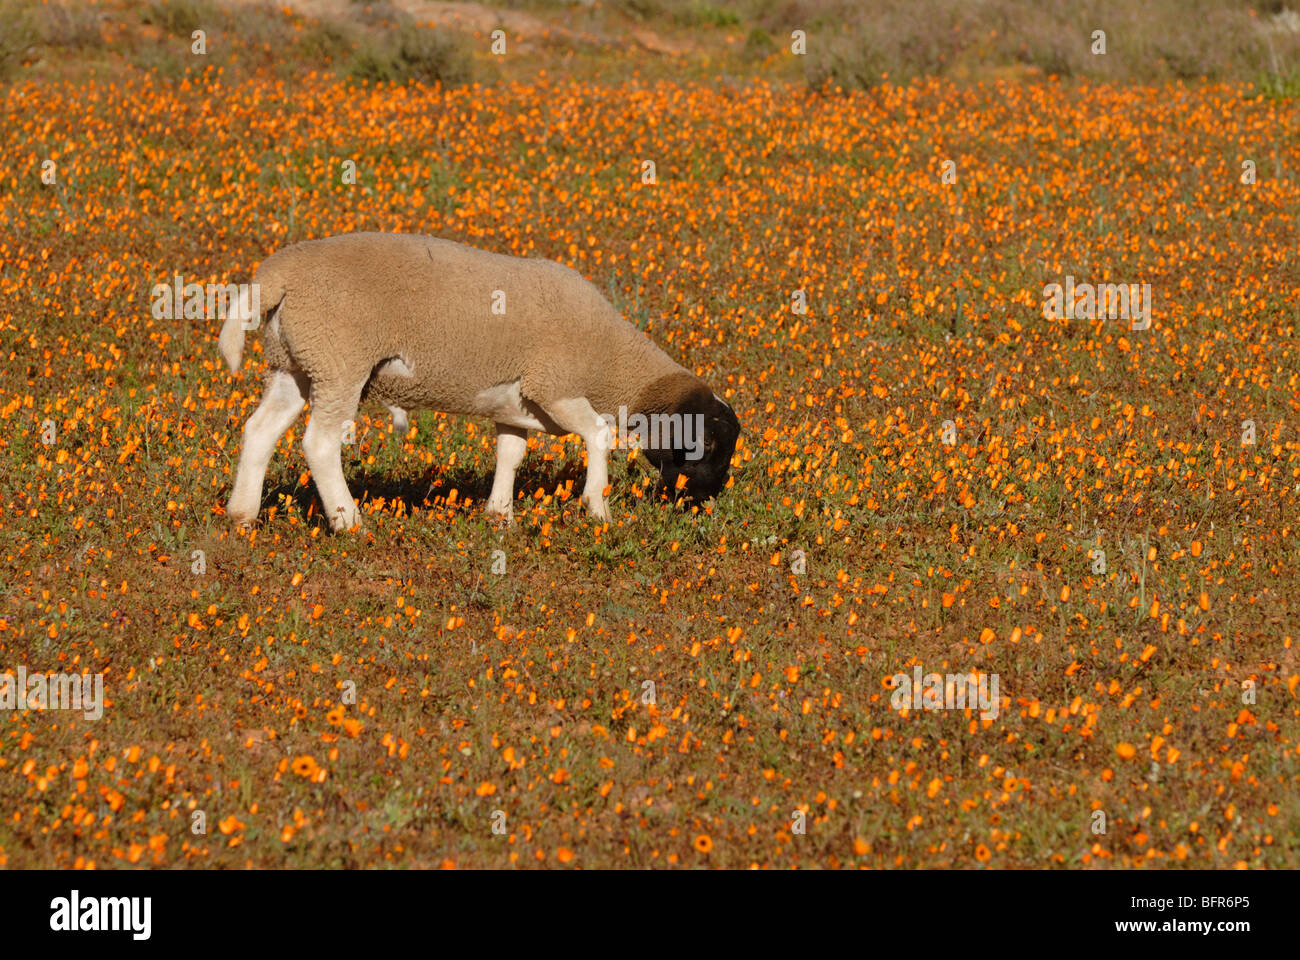 Sheep in daisy-covered field Stock Photo